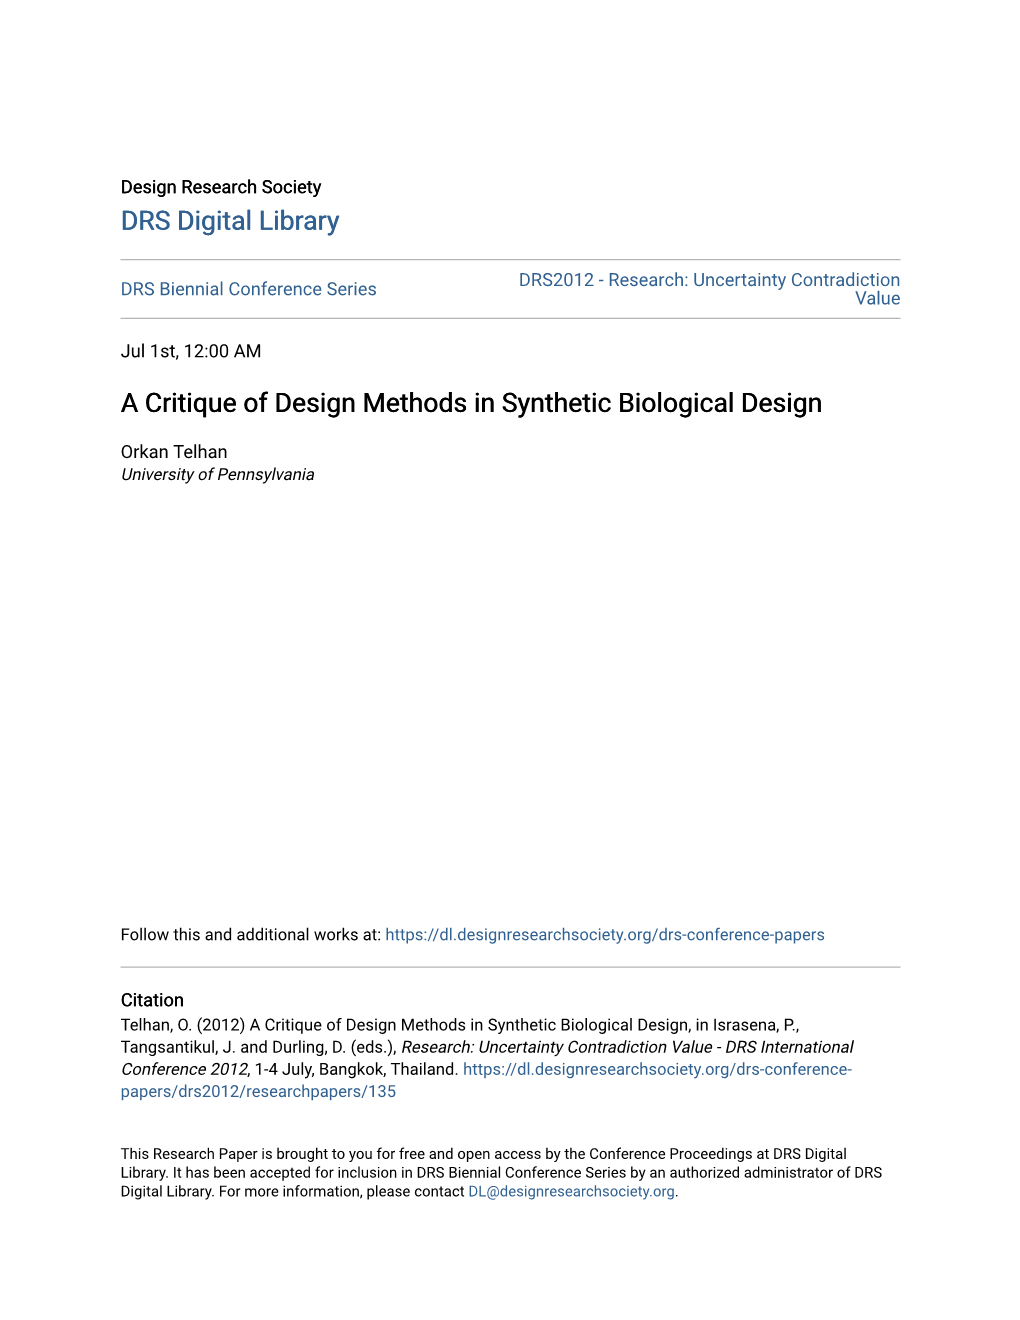 A Critique of Design Methods in Synthetic Biological Design